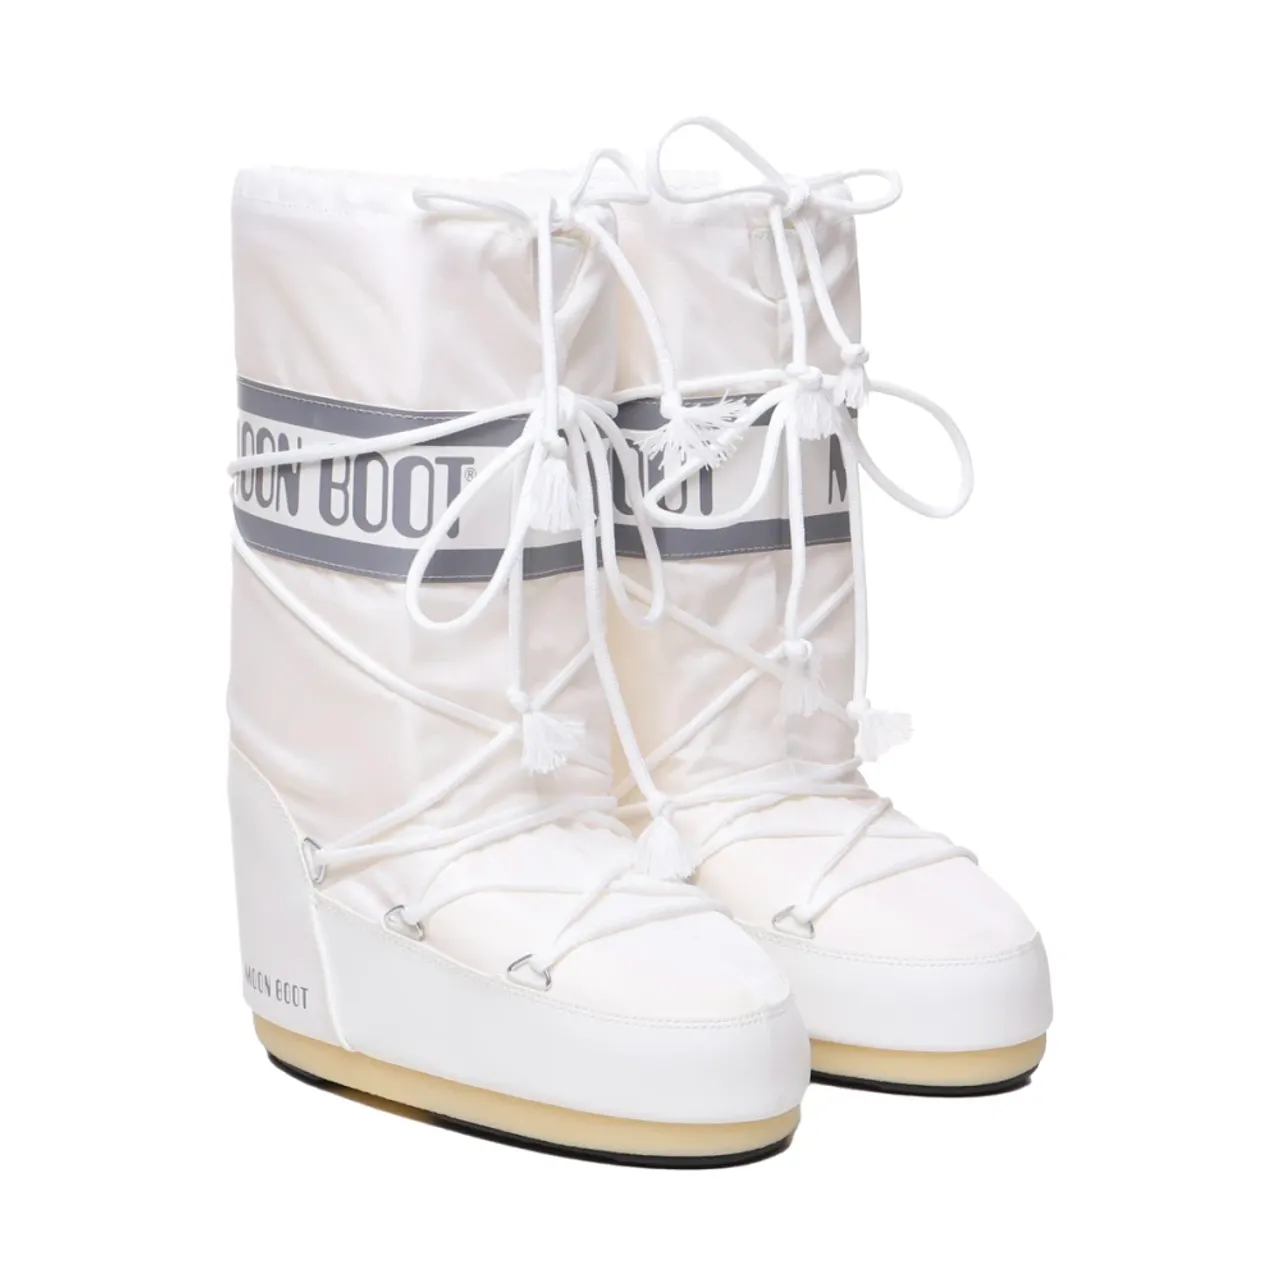 Moon Boot , Moon Boot Boots White ,White female, Sizes: